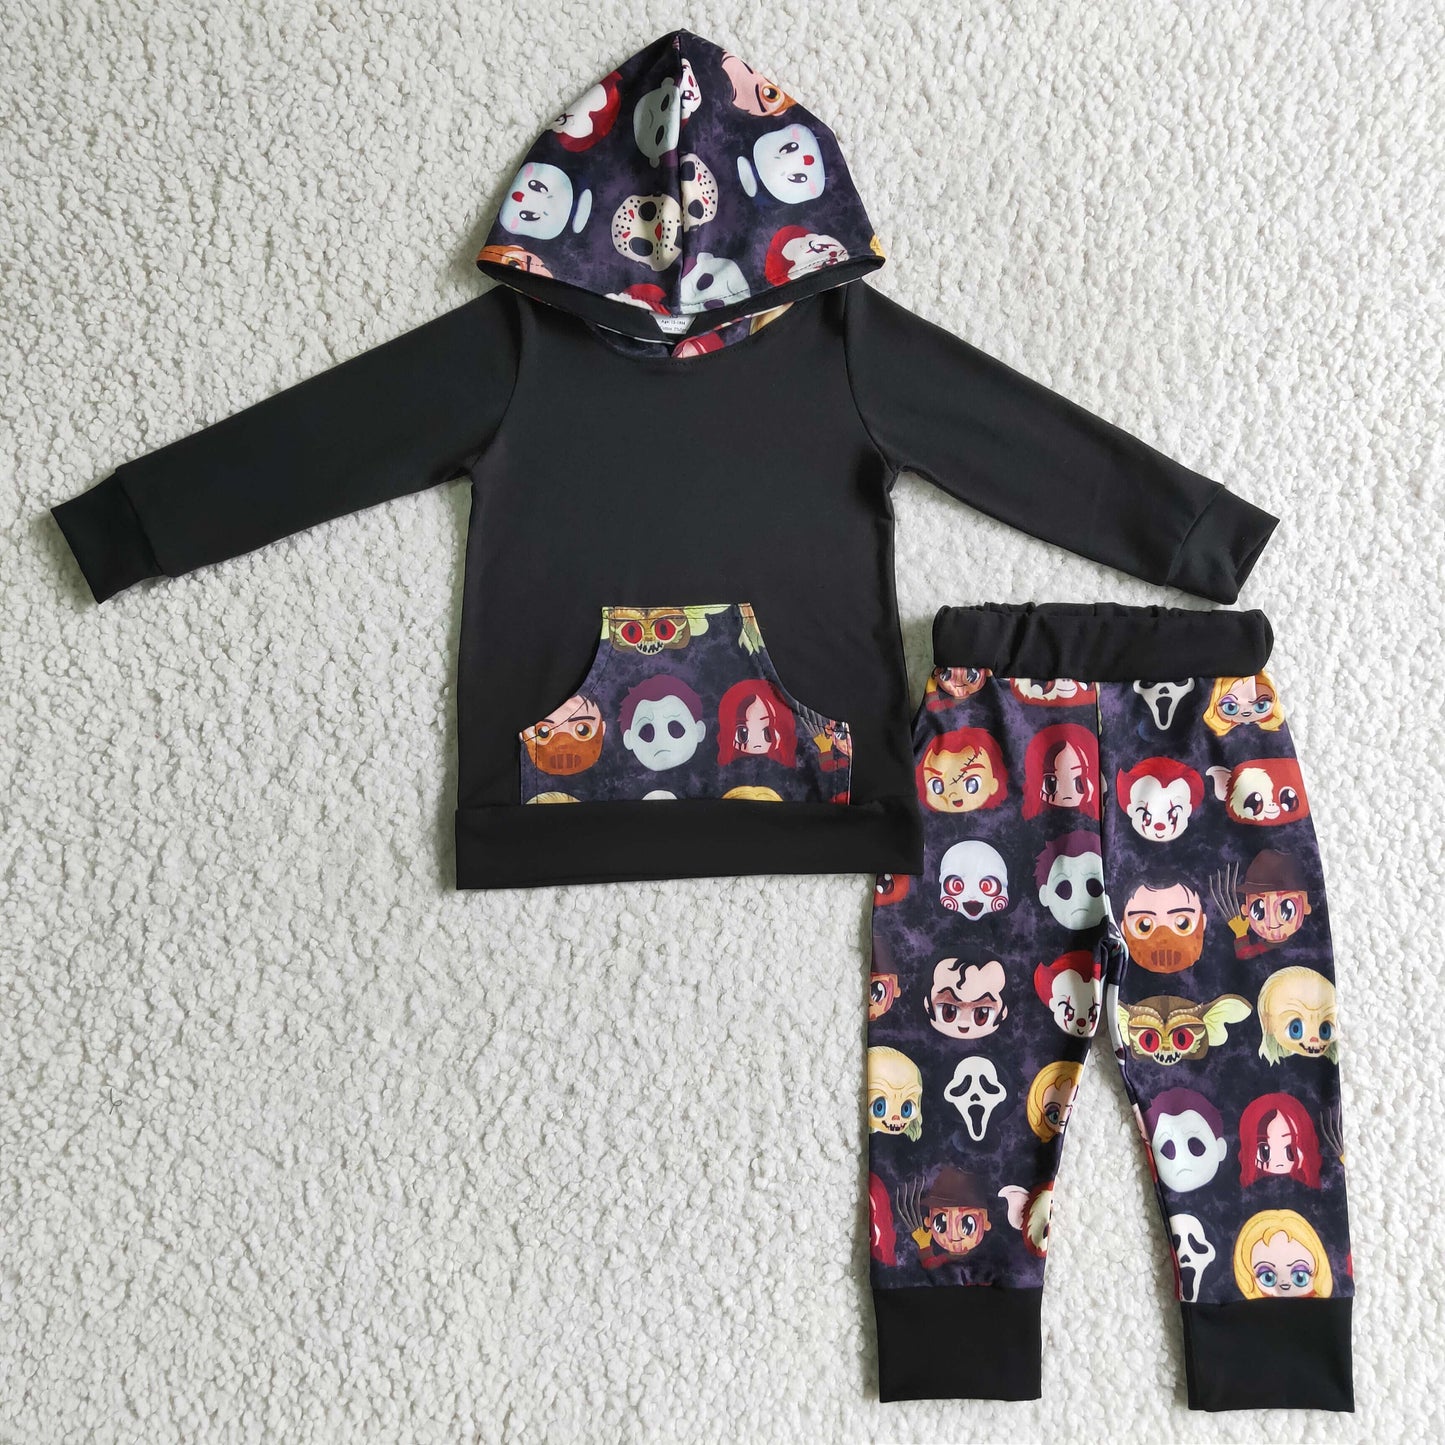 black clown hoodie style outfit halloween clothing for little boy